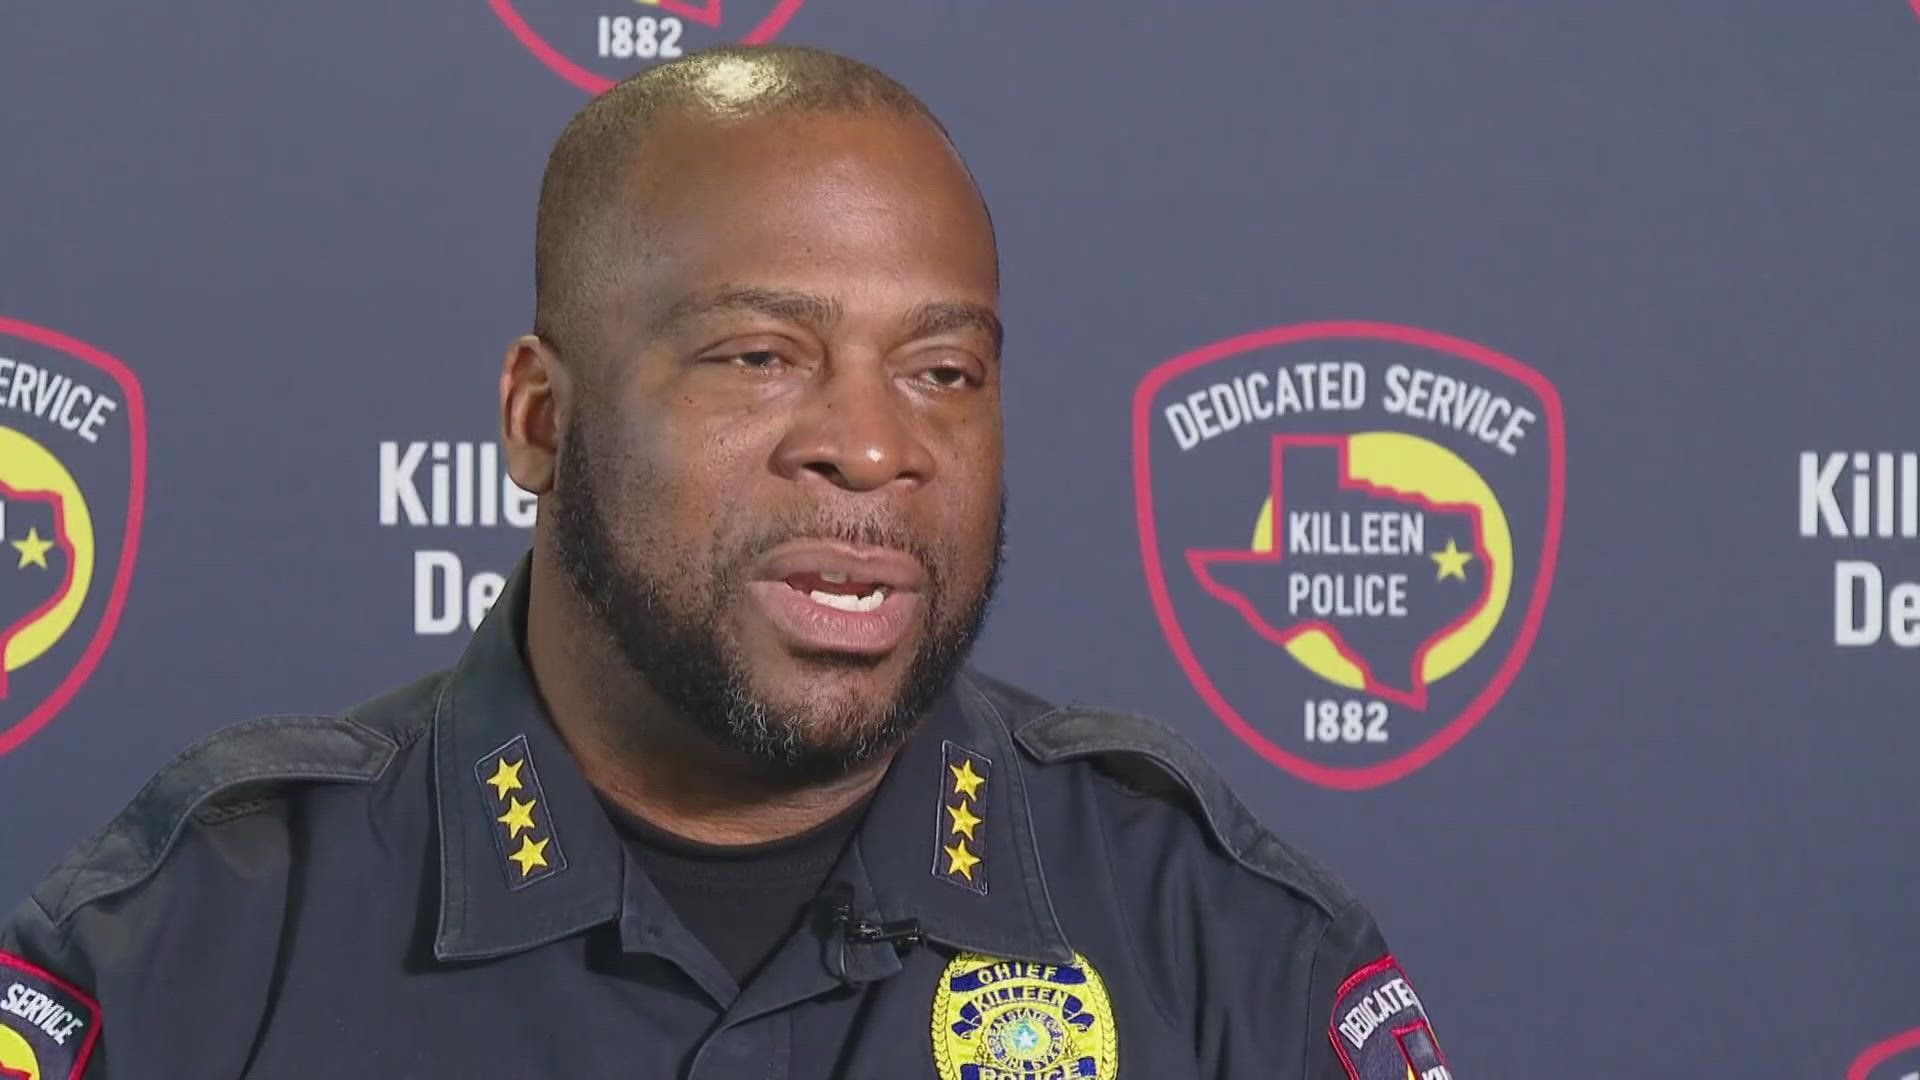 The Killeen Police Department is looking for the next chief in line as Charles Kimble is retiring after a 31 year career in law enforcement.